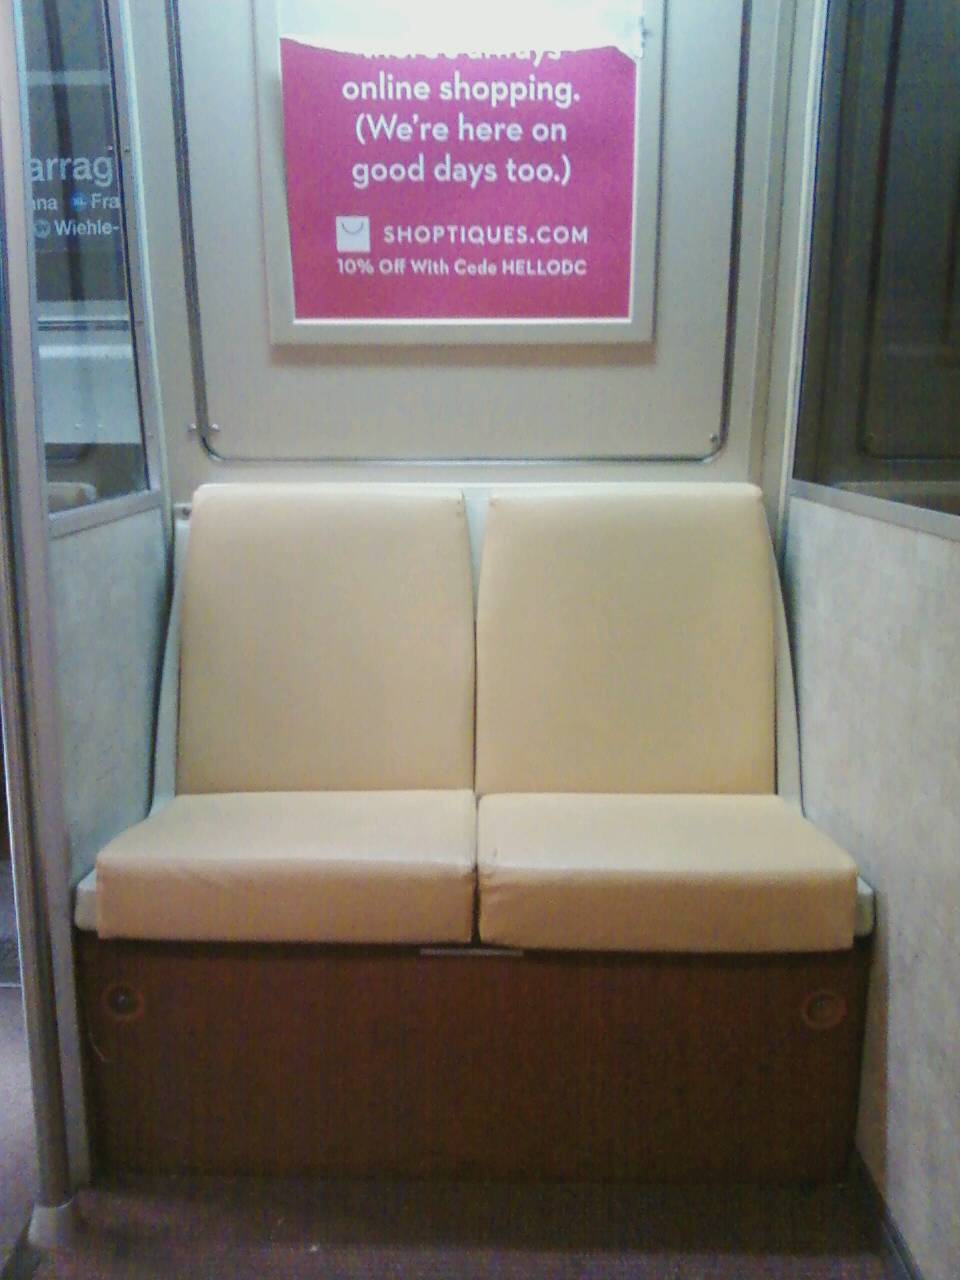 WMATA/DC Metro 2-seat set-aside section of car 1183; note that the 
two seat sections (one on each side of the car immediately adjacent to 
the motorman's cab) are protected from outdoor weather and elements, as 
well as the rest of the car body, but plastic dividers. For further 
details, please visit www.wirelessnotes.org.